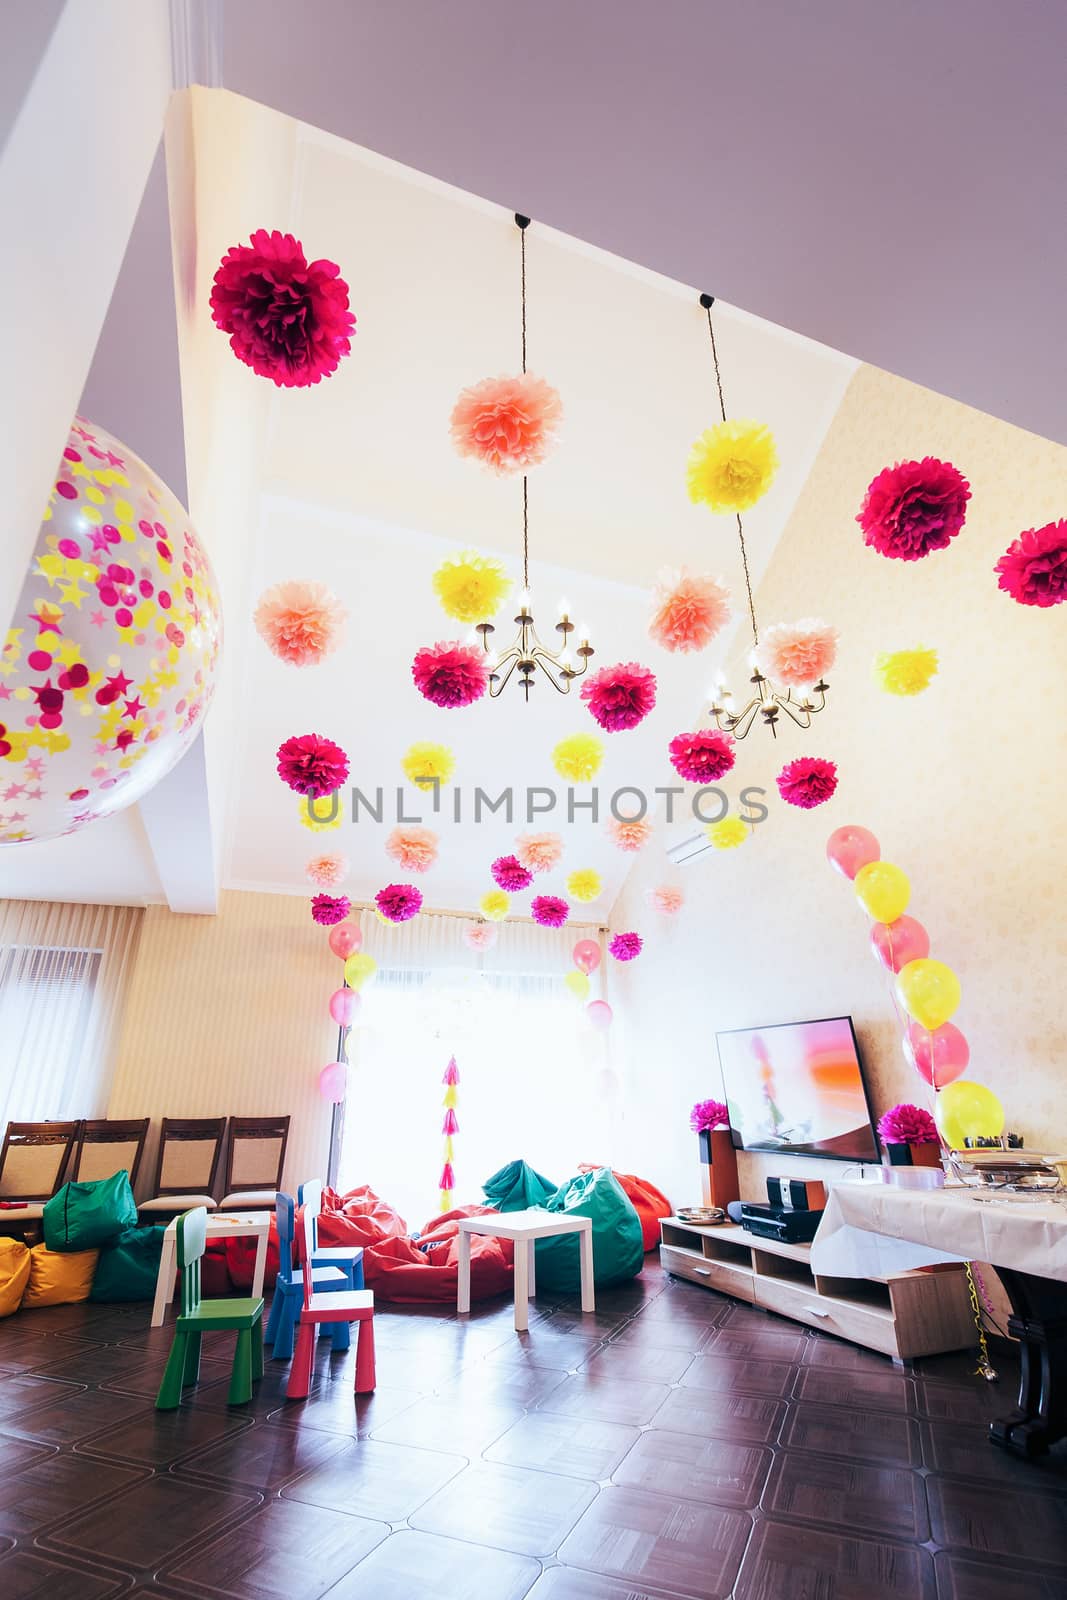 A large room with high ceilings decorated with large balloons an by Opikanets